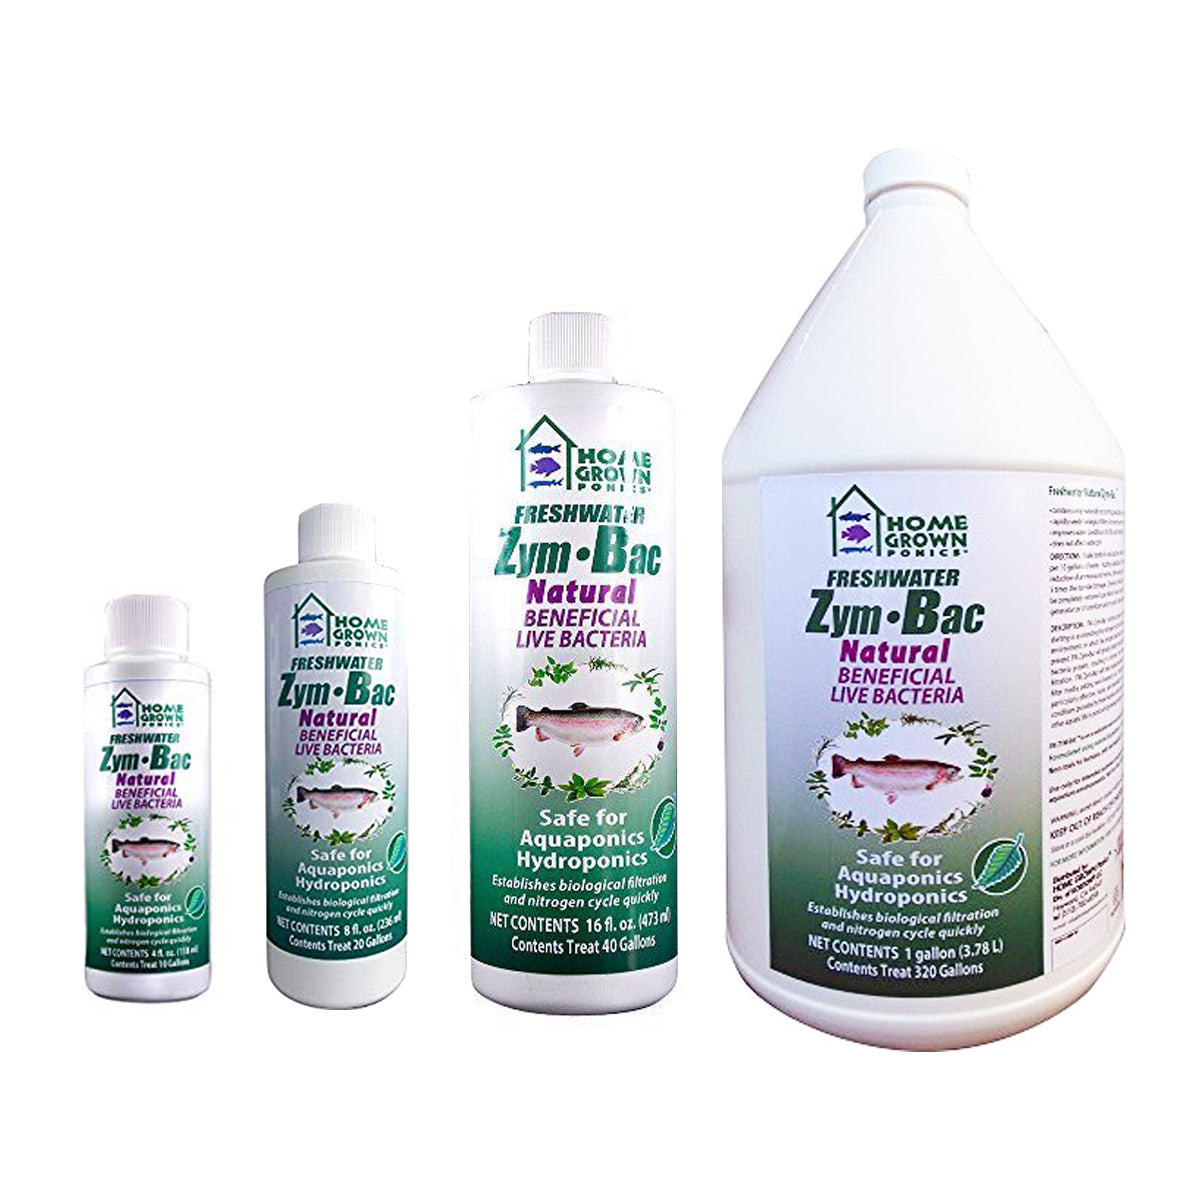 Two bottles of Zym Bac – Nitrifying Bacteria, containing nitrifying bacteria for optimizing aquarium water conditions and enhancing biological filtration, produced by TAS.